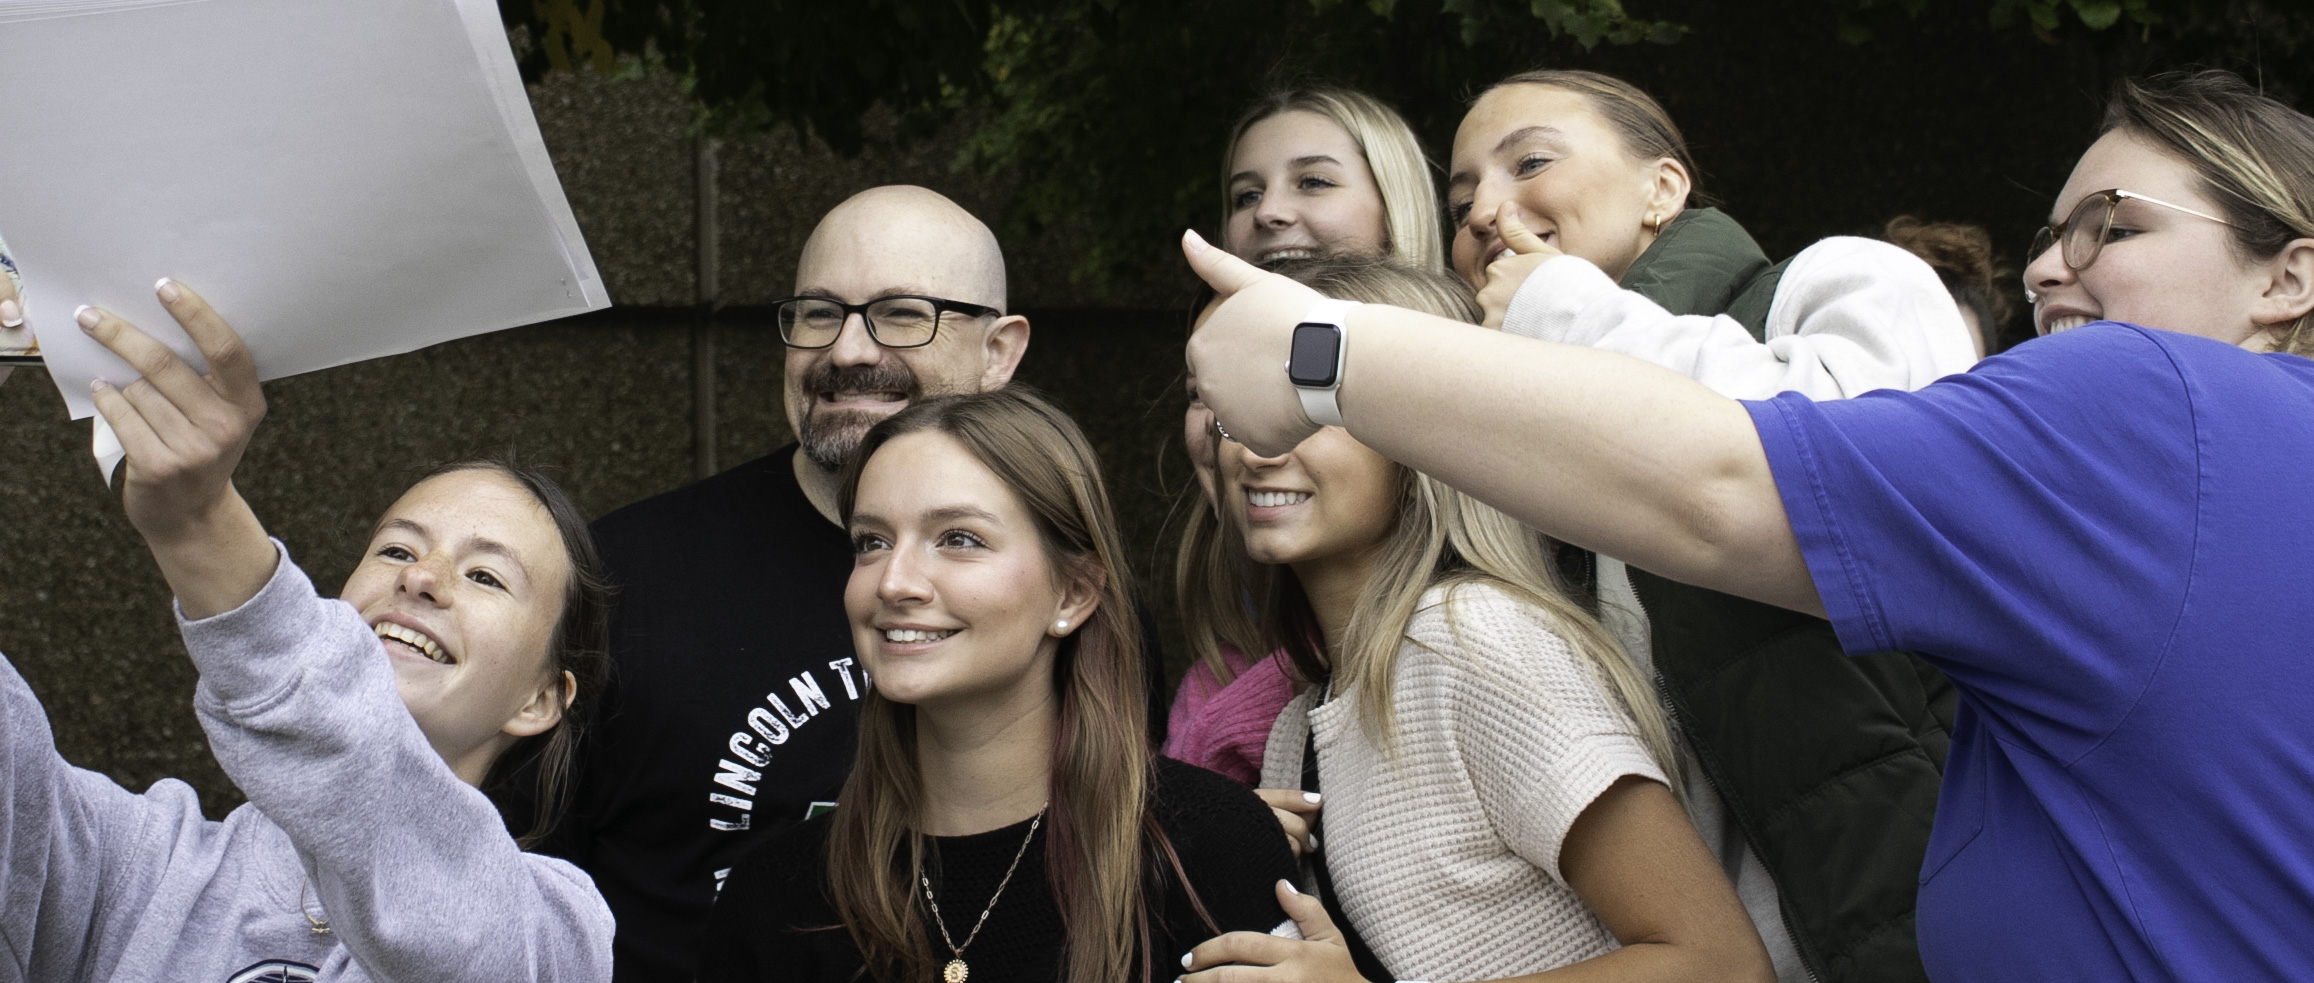 A group of students on a tour taking a selfie